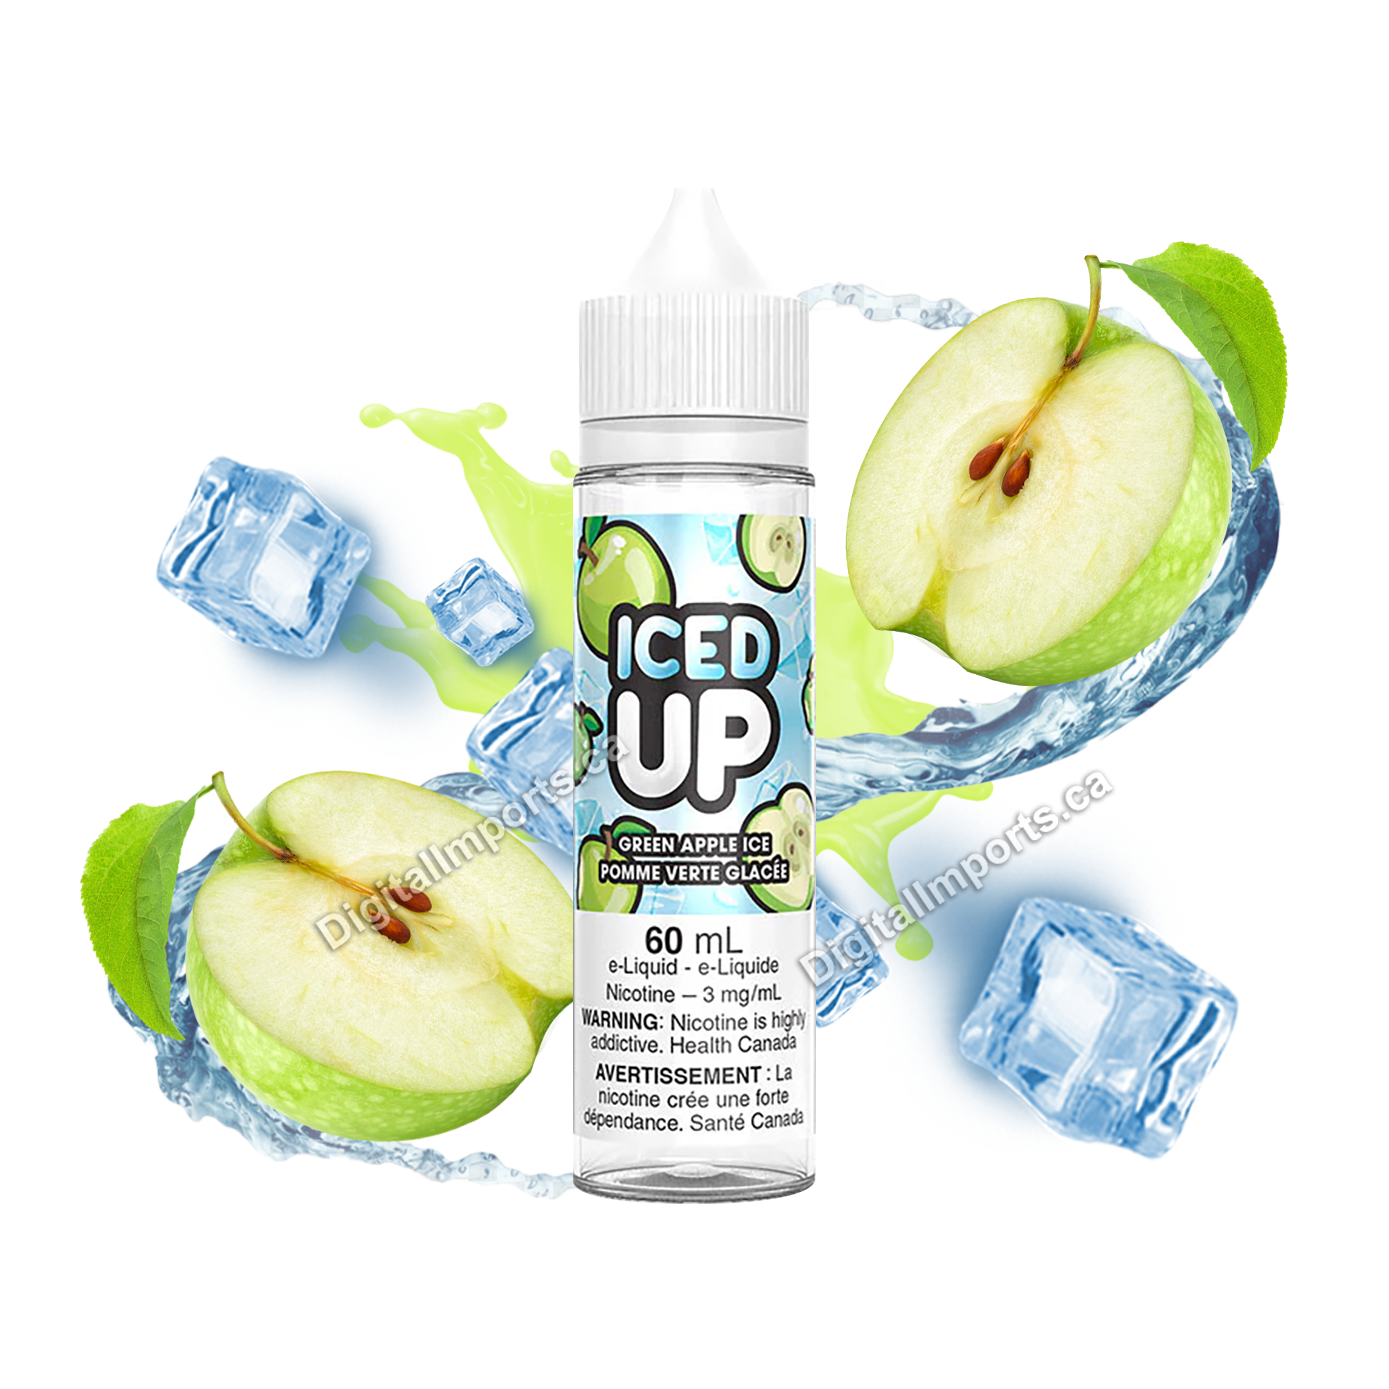 ICED UP - GREEN APPLE ICE